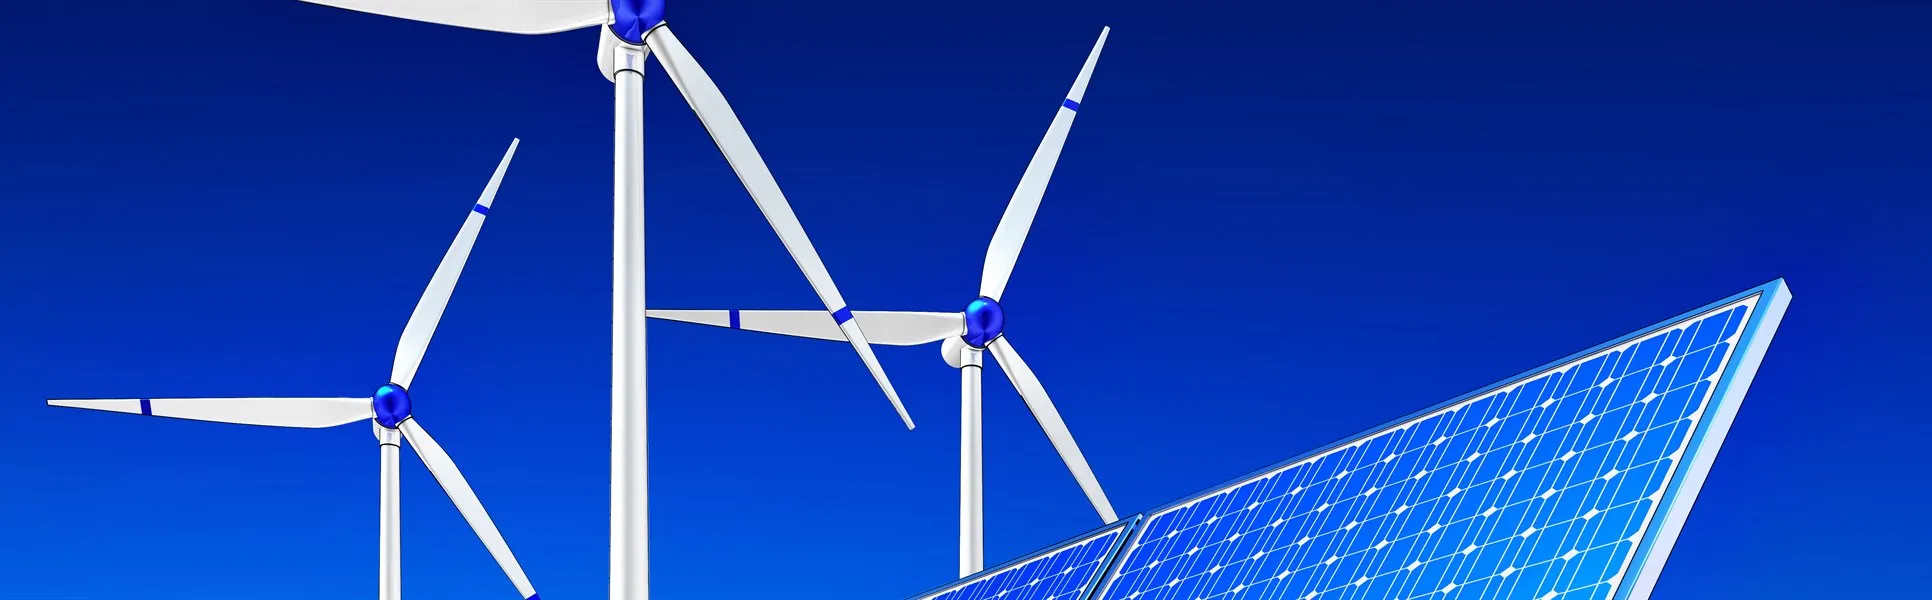 Green Energy Solar cells and wind mills